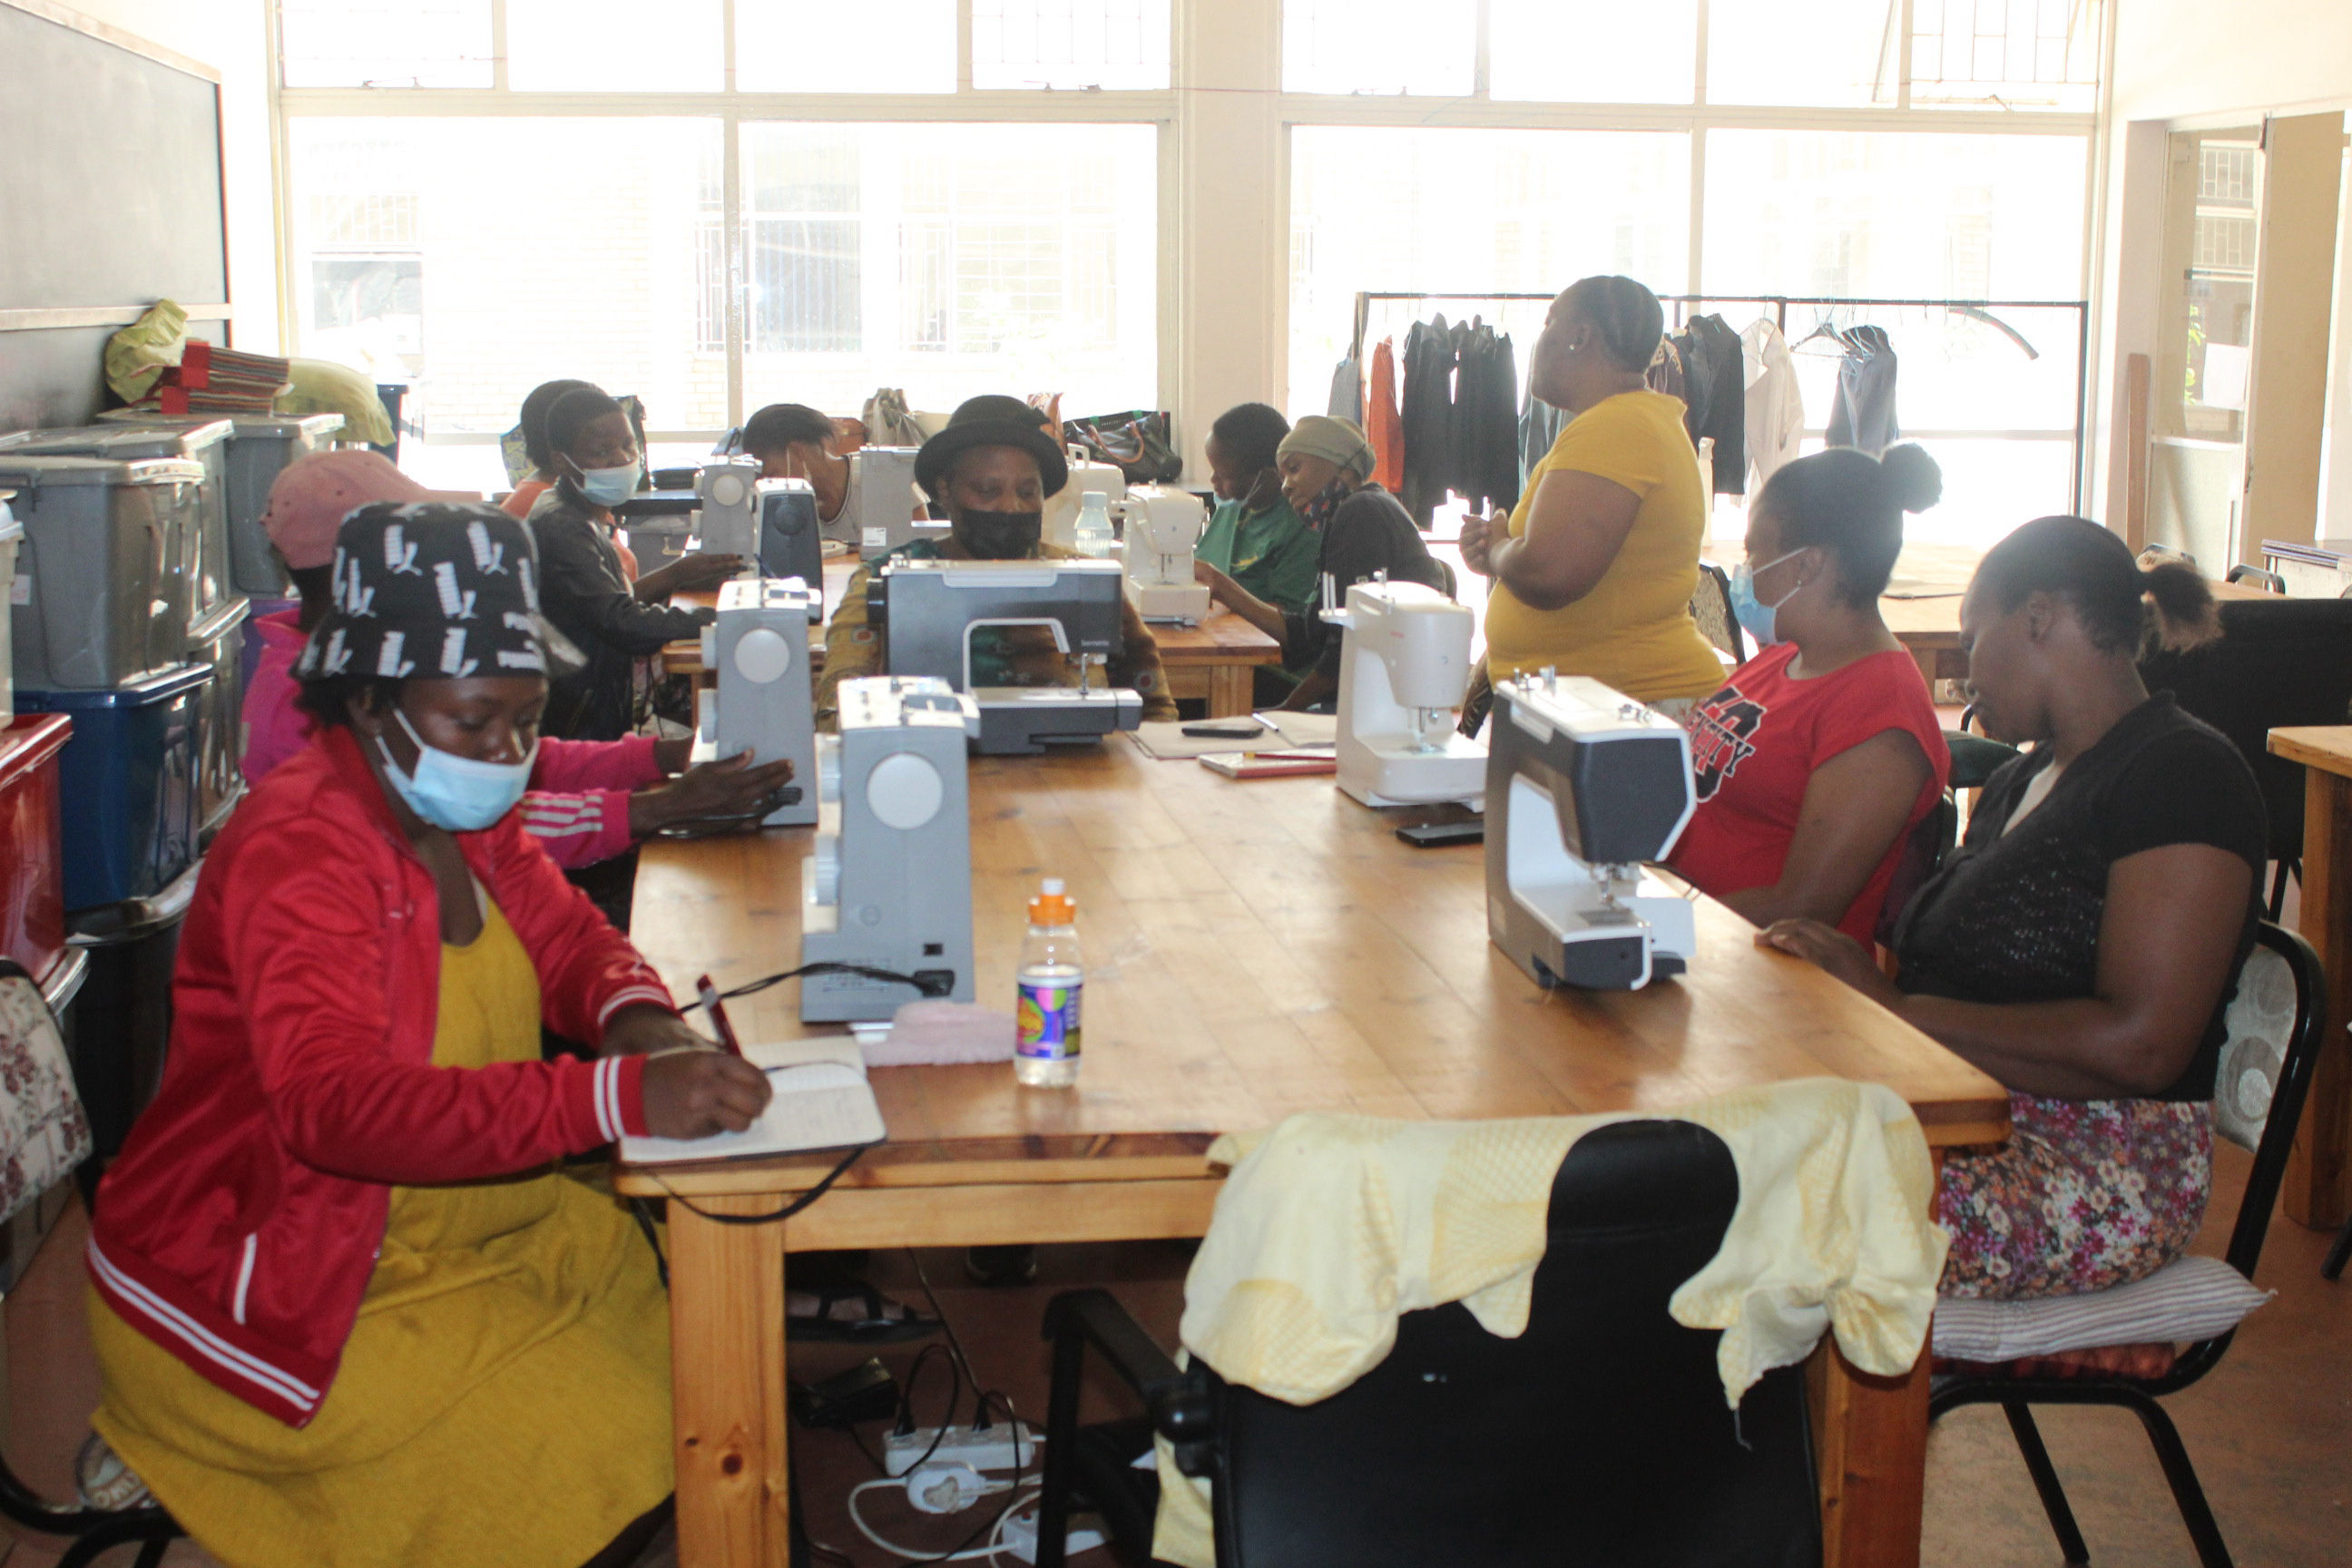 Sewing lessons at Outreach Foundation